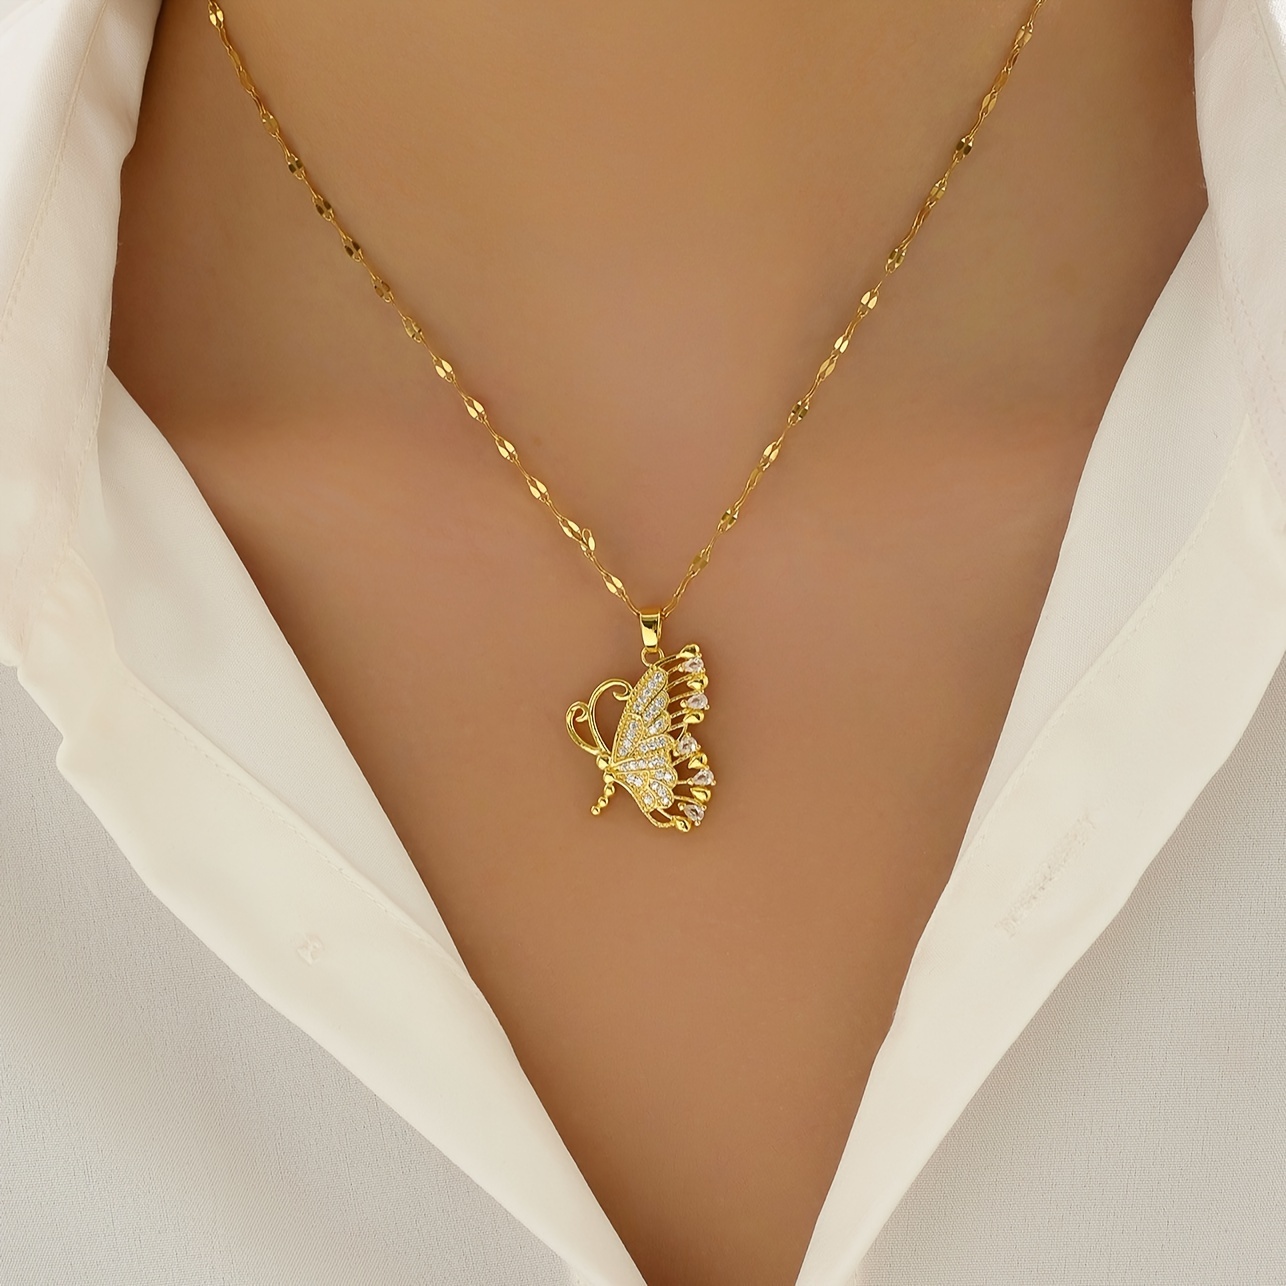 

A Gold Stainless Steel Chain With Gold-plated Cubic Zirconia Butterfly Design, Personalized Fashion Trend, Minimalist Women's Daily Party, Christmas, Halloween Versatile Necklace Pendant